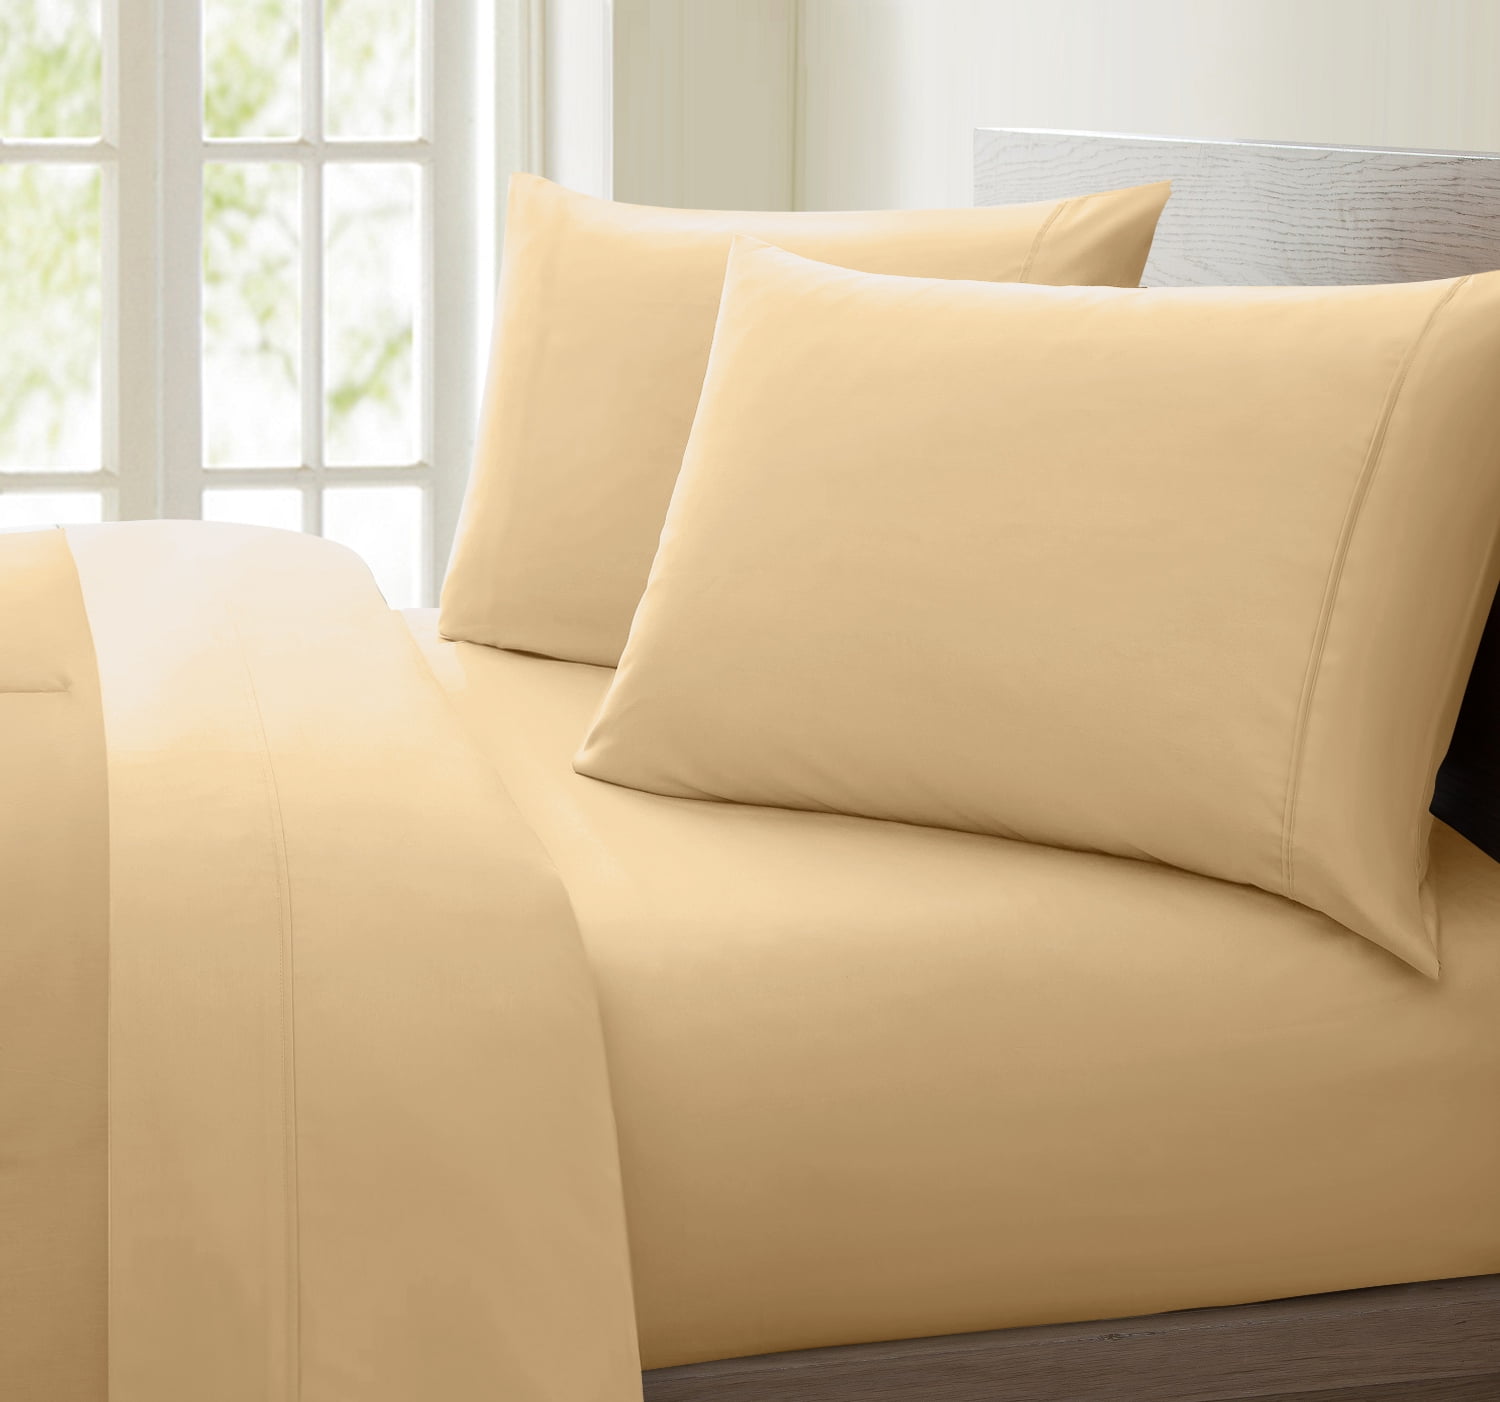 Double size Mustard Throw luxurious large 